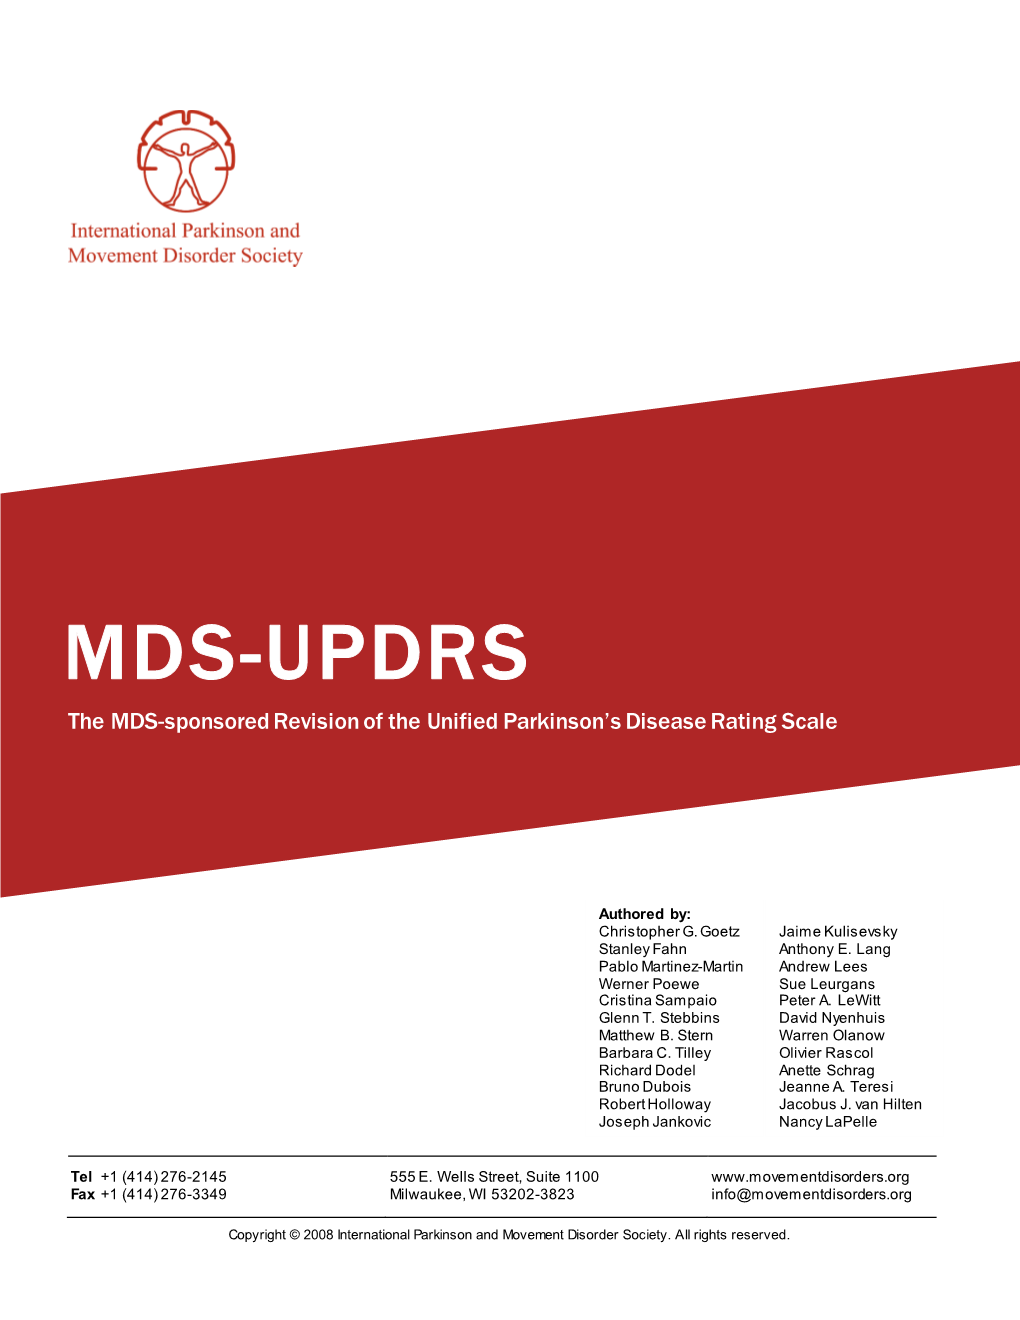 MDS-UPDRS the MDS-Sponsored Revision of the Unified Parkinson’S Disease Rating Scale